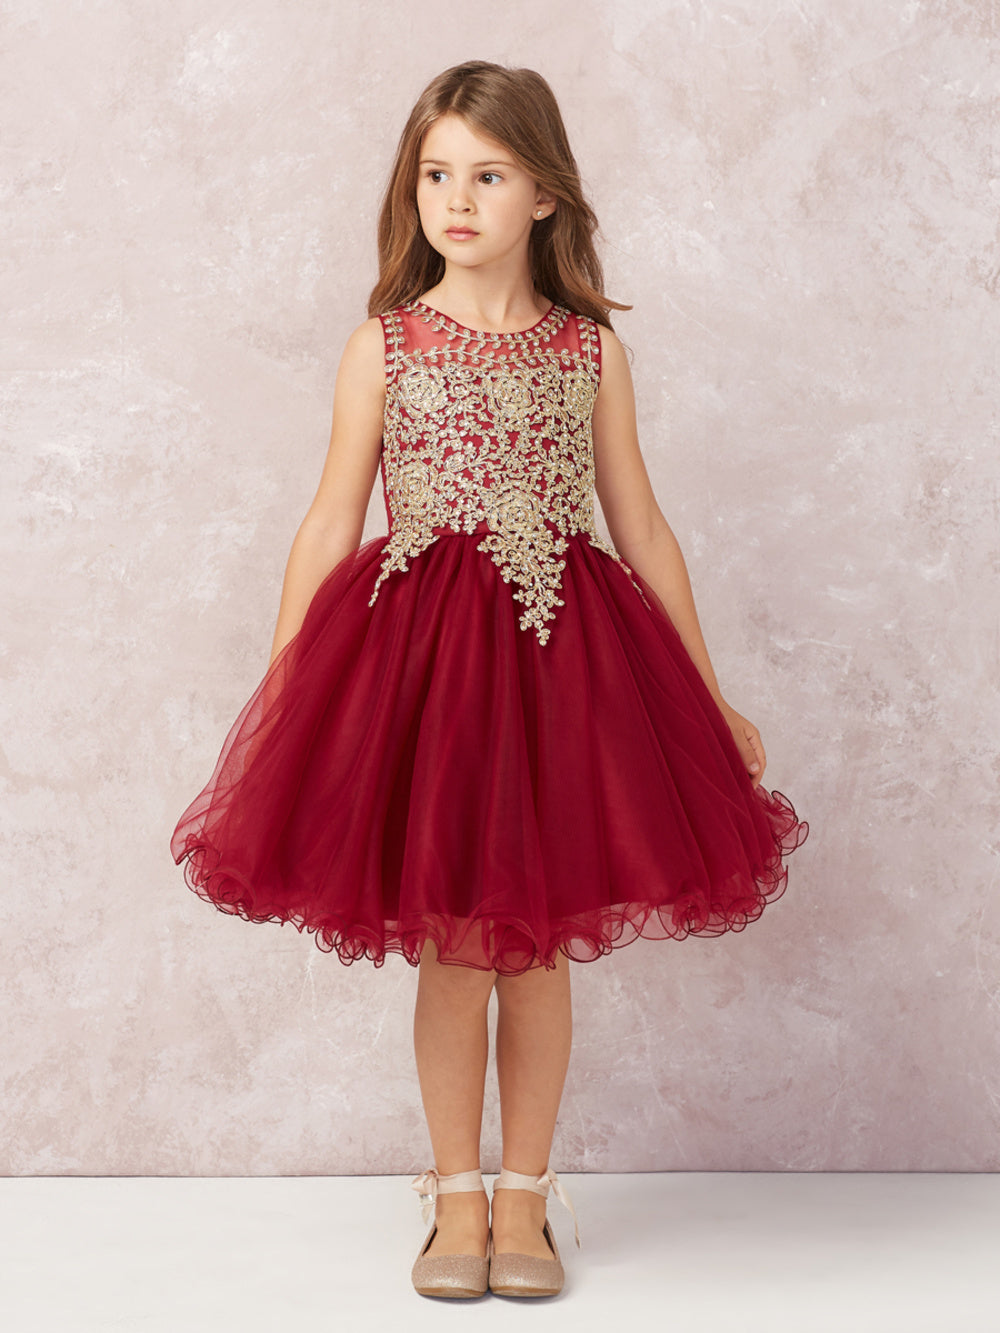 Burgundy Girl Dress with Floral Applique Bodice - AS7013